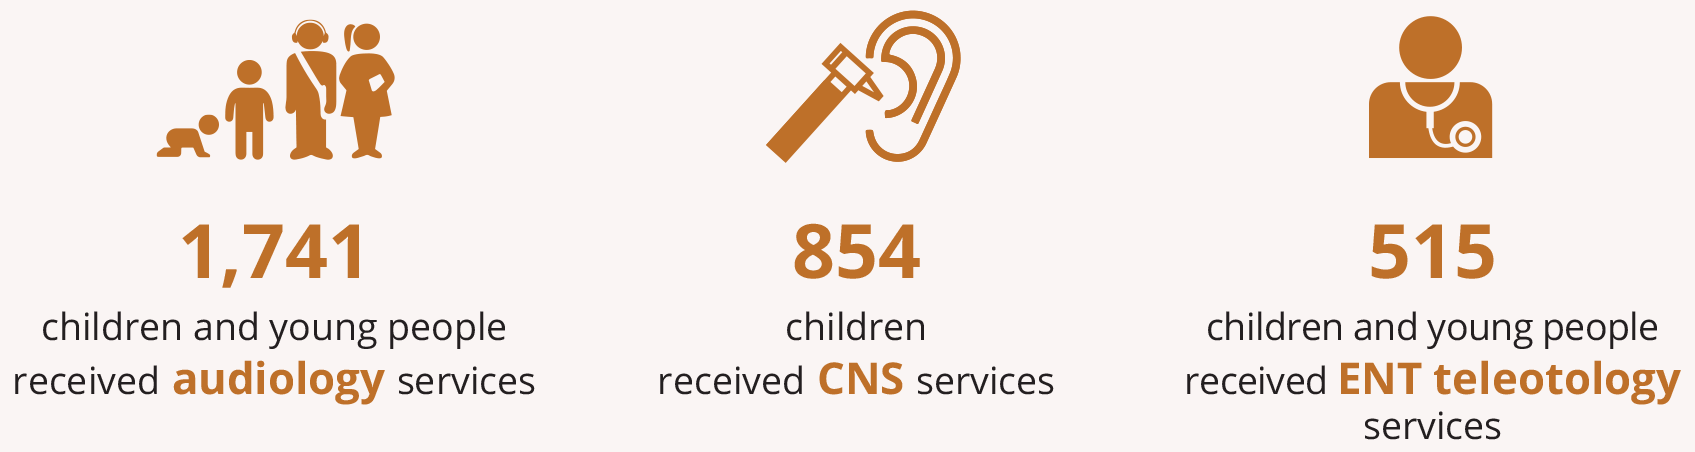 The infographic shows that in 2021, 1,741 children and young people received audiology services, 854 received CNS services and 515 received ENT teleotology services.